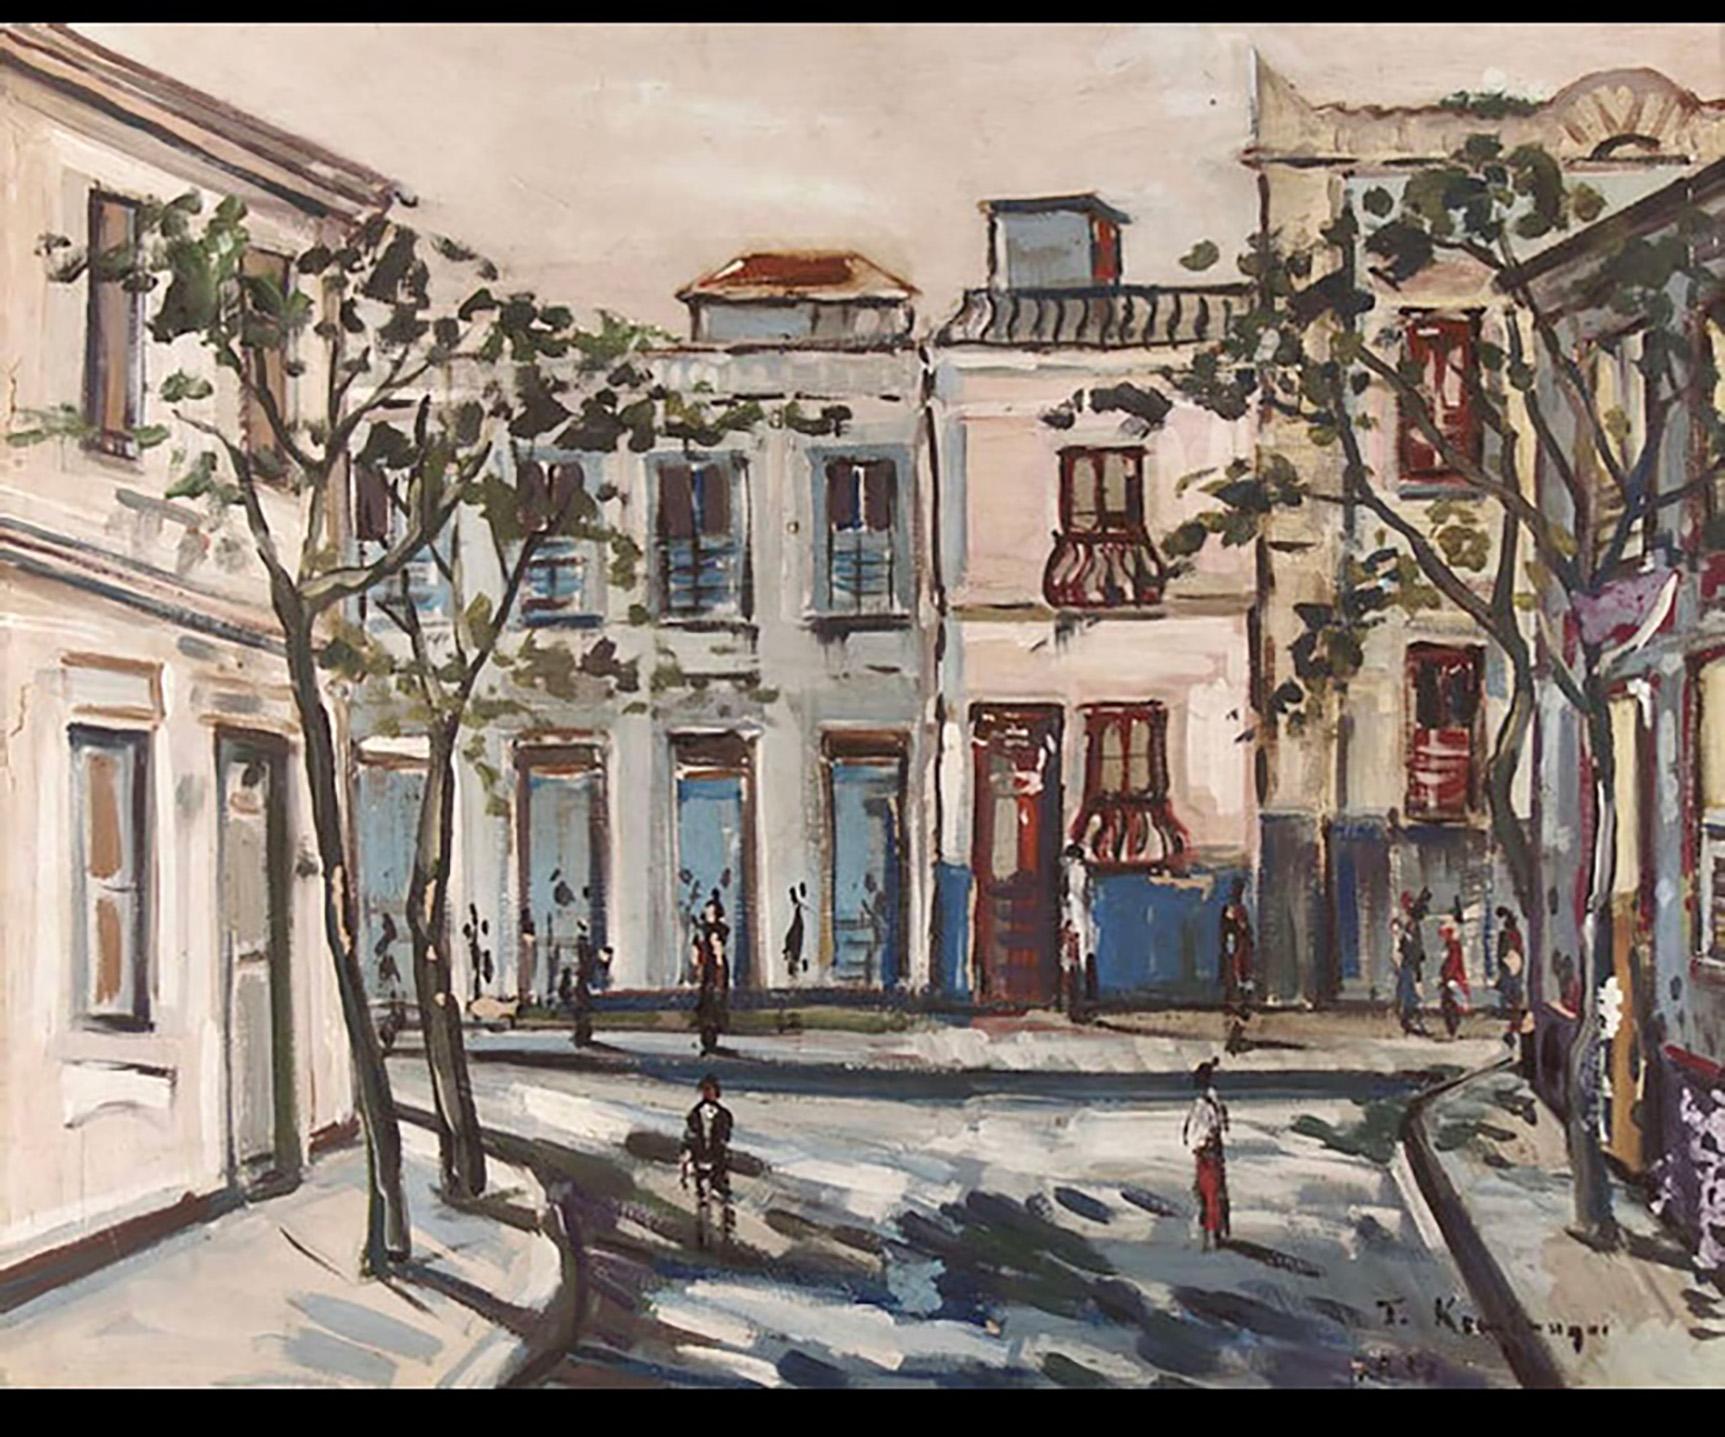 “Casario do Rio de Janeiro, 1958”.
Oil s/ duratex.
Signed and dated at the bottom right.

The painting represents an urban landscape of the city of Rio de Janeiro, Brazil,

This harmonious painting in the post-impressionist style is in excellent